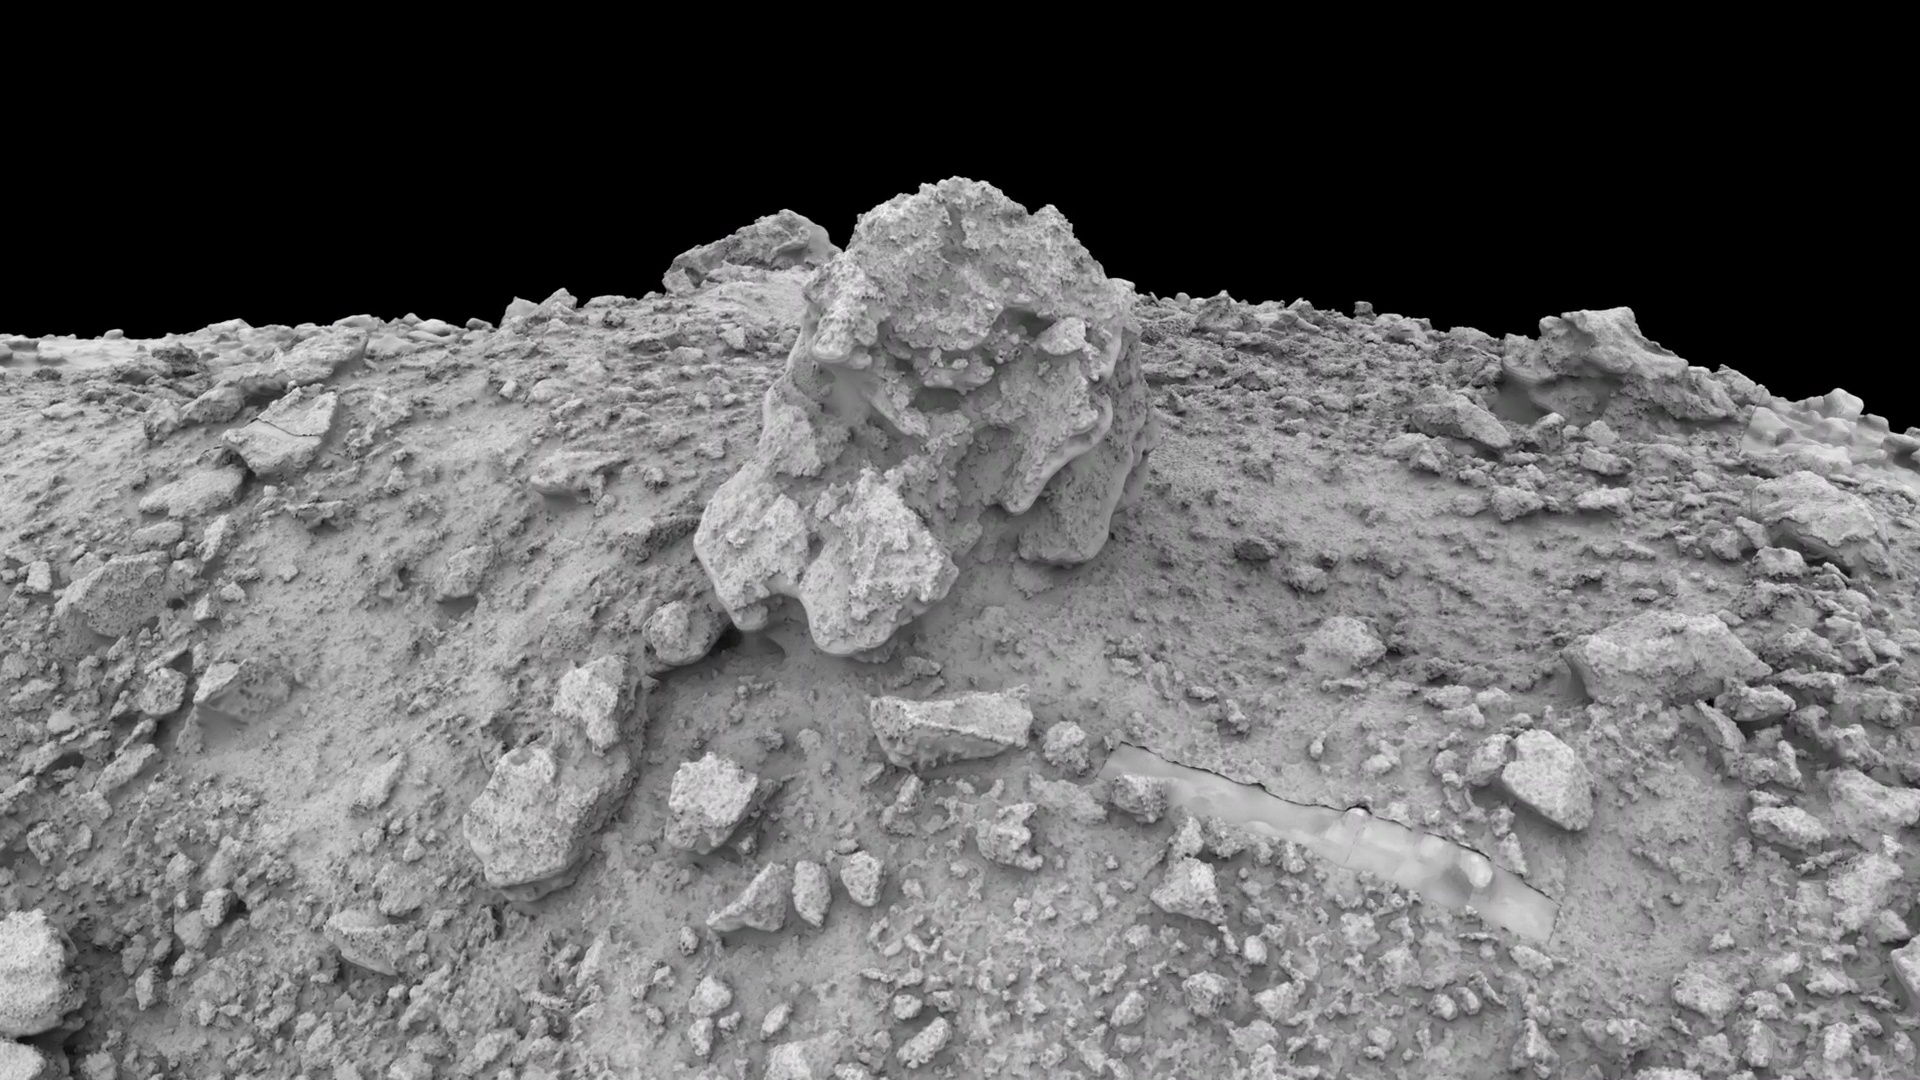 Learn how “Tour of Asteroid Bennu” was created using data from OSIRIS-REx.Complete transcript available.Universal Production Music: “Spindrift” by Max Cameron Concors; “Unearthing Dark Secrets” by Andrew Joseph Carpenter and Mark Richmond PhillipsWatch this video on the NASA Goddard YouTube channel.